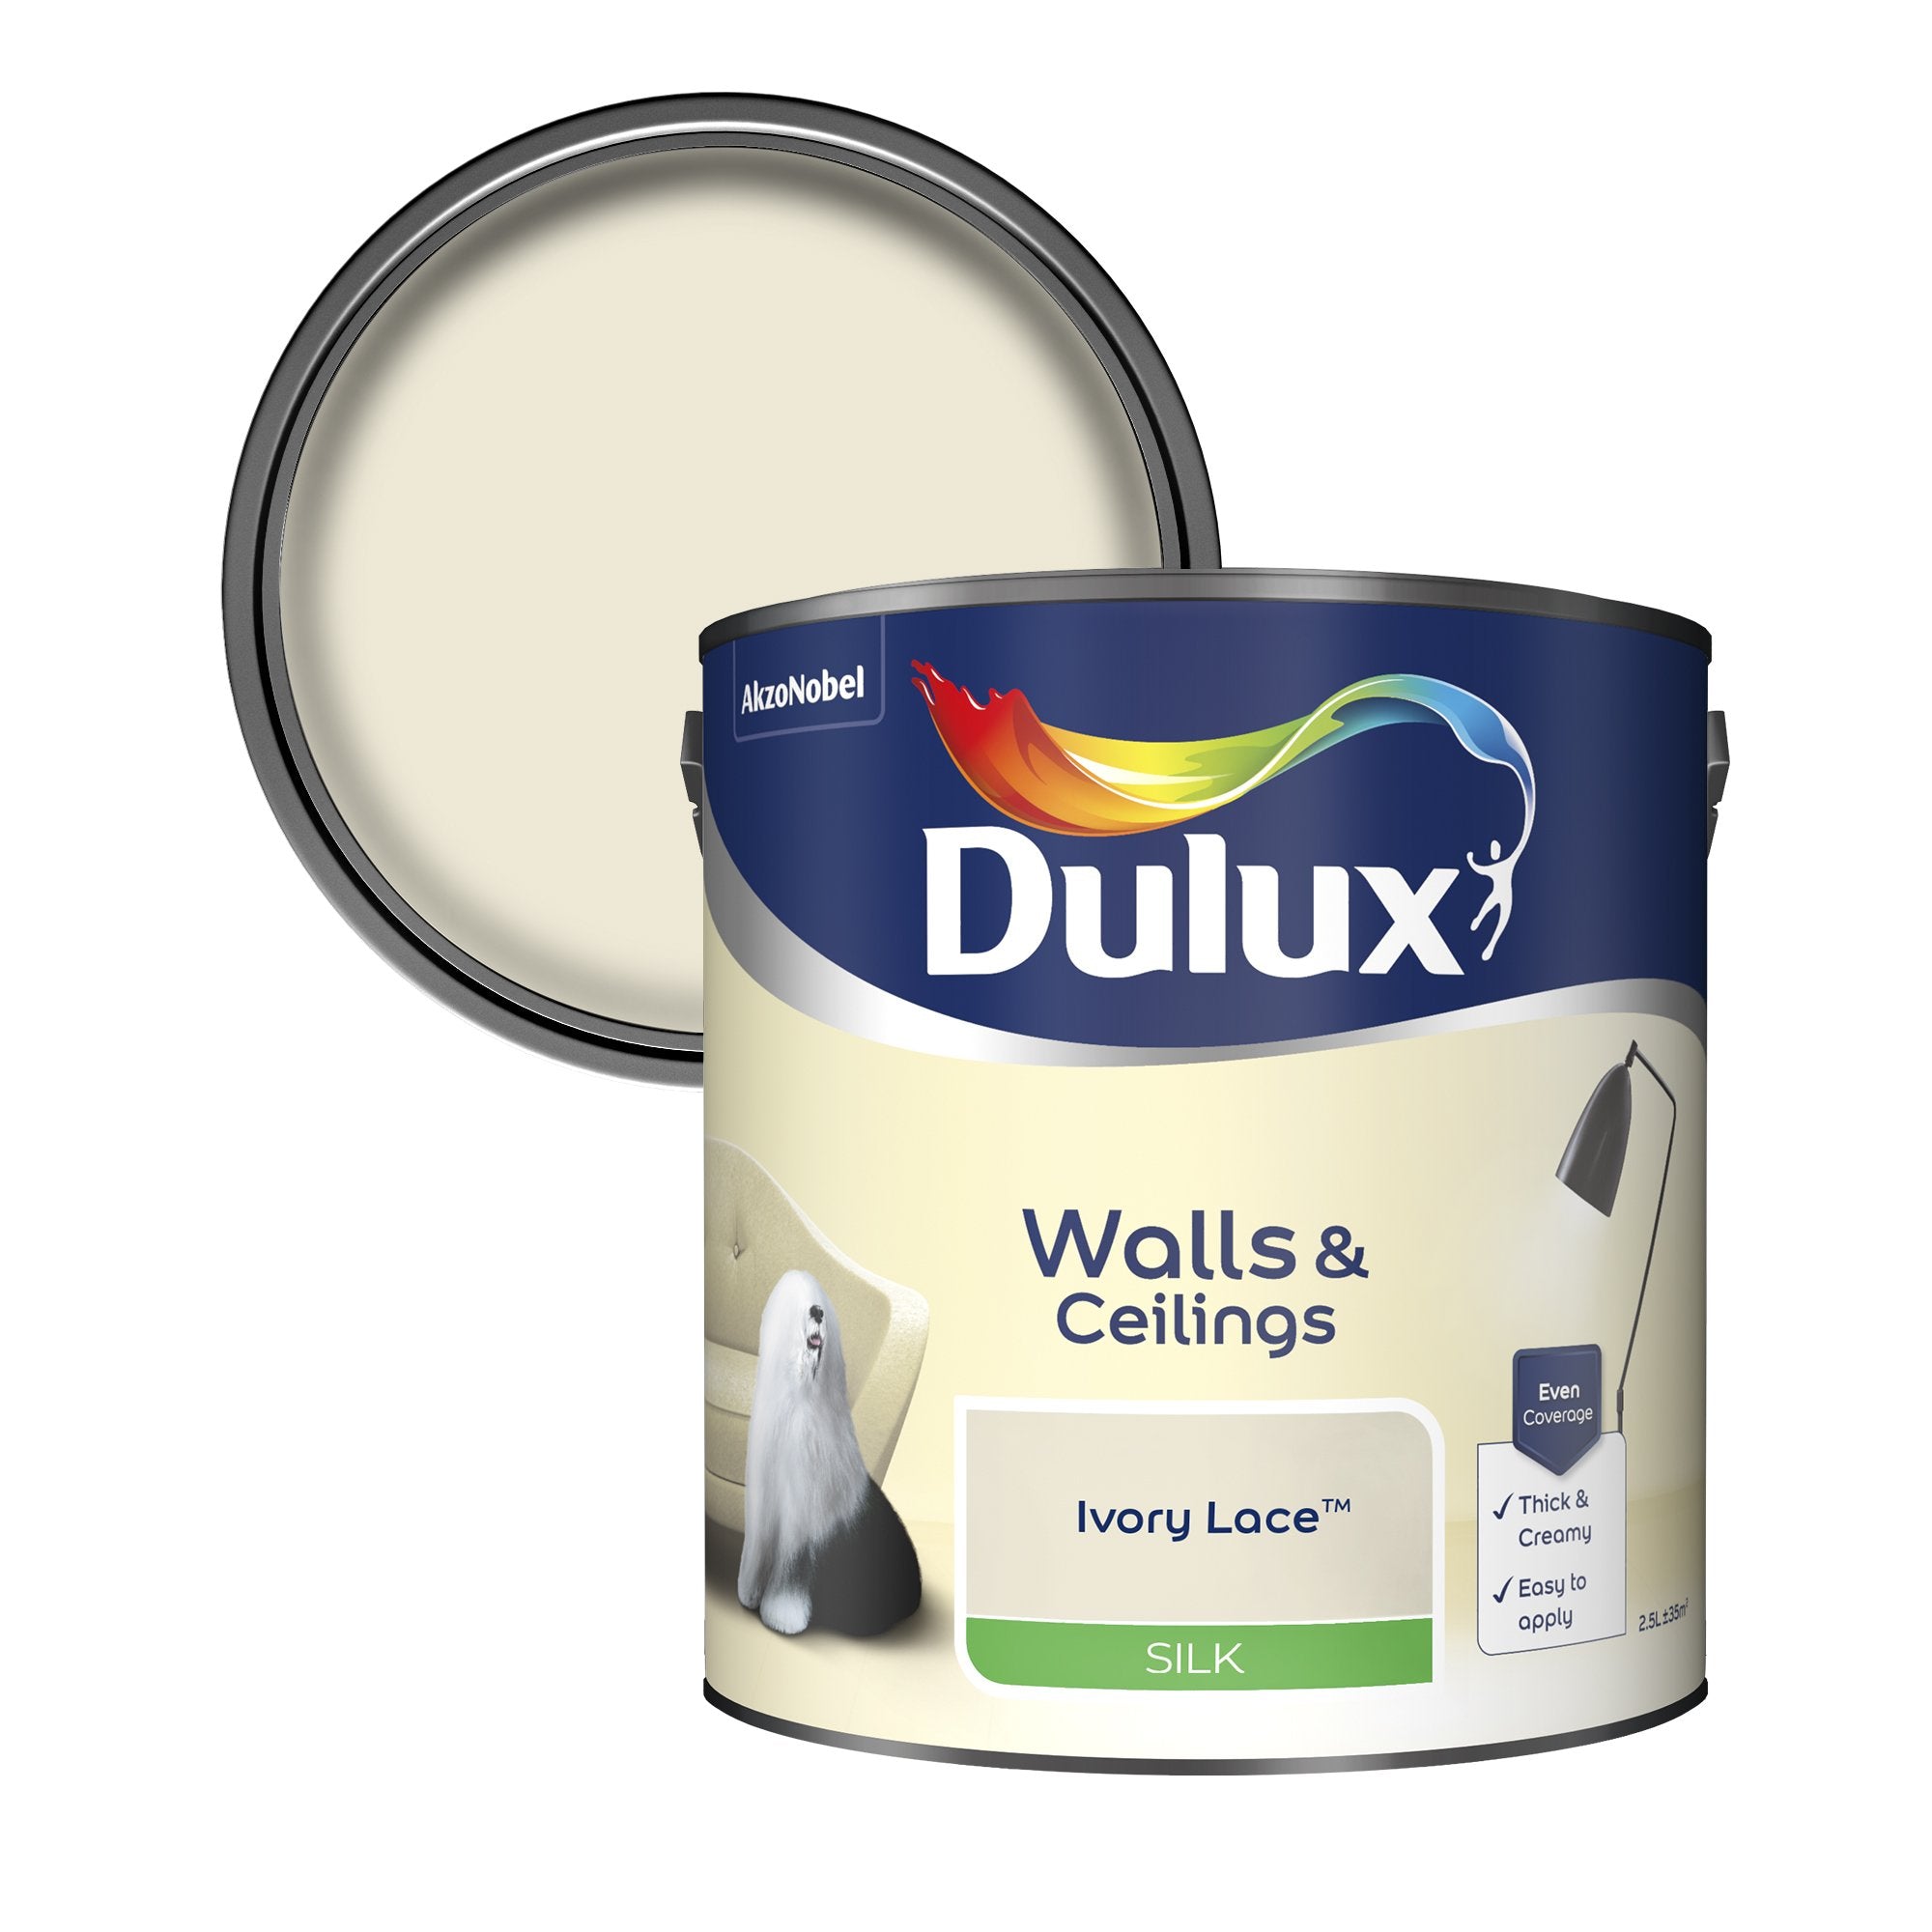 Dulux-Silk-Emulsion-Paint-For-Walls-And-Ceilings-Ivory-Lace-2.5L